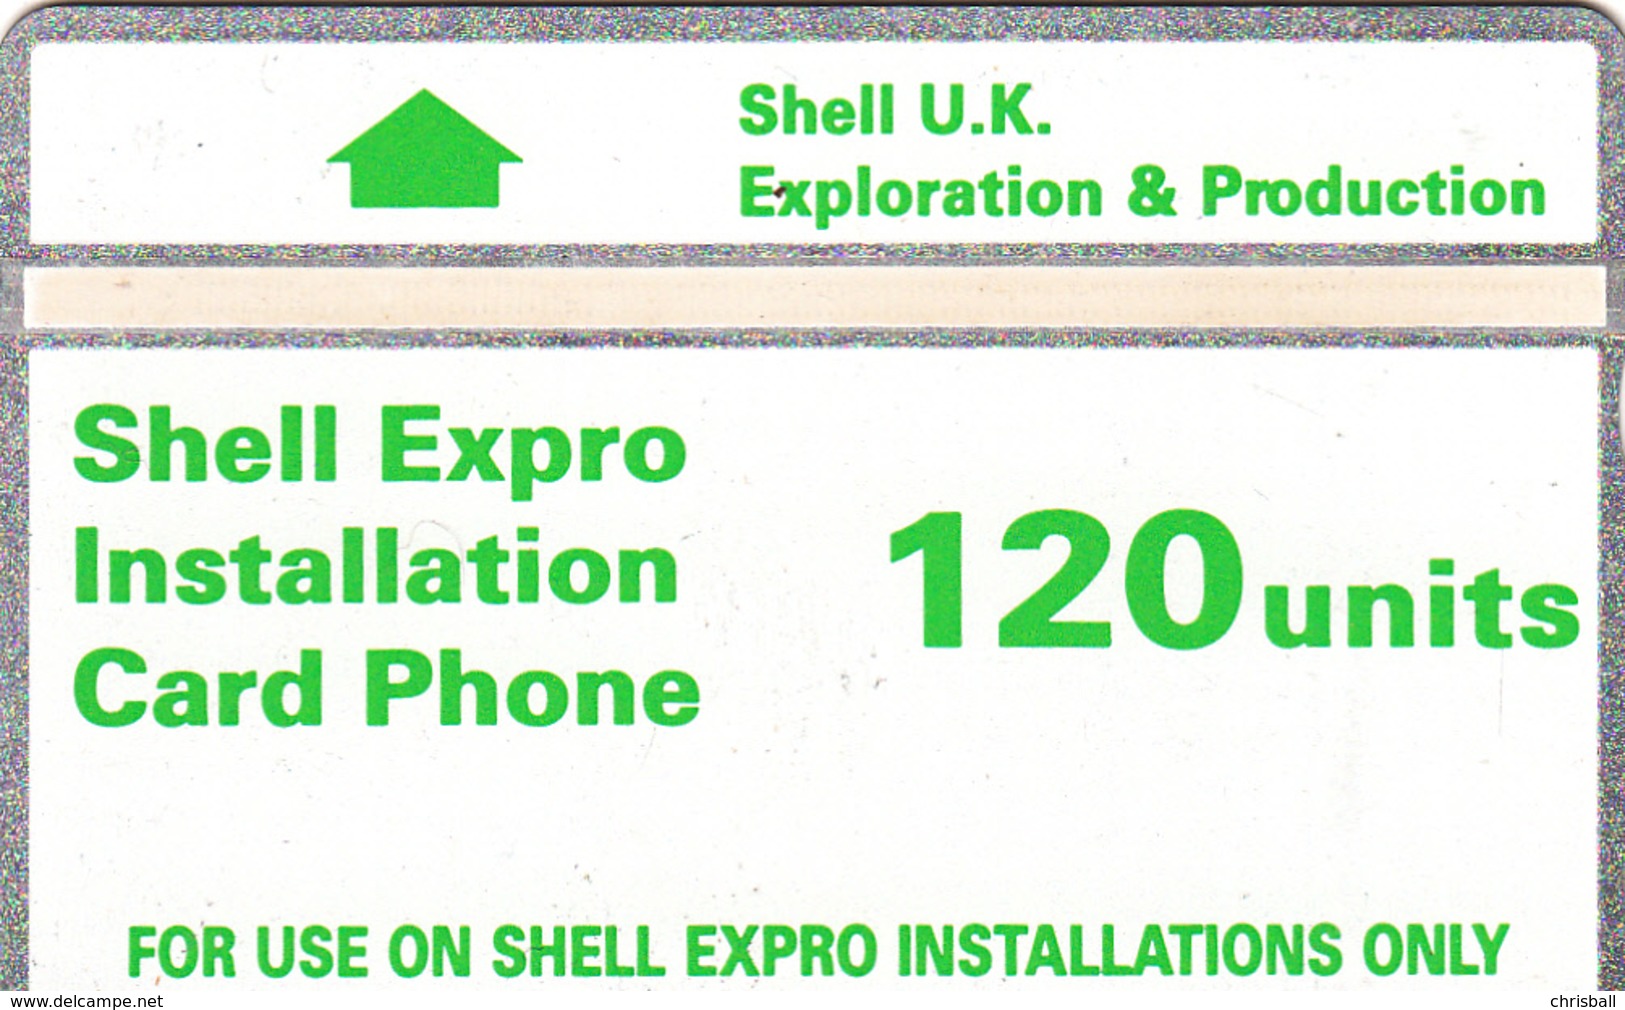 BT Oil Rig Phonecard - Shell Expro 120unit (Blue Green) - Superb Fine Used Condition - [ 2] Oil Drilling Rig